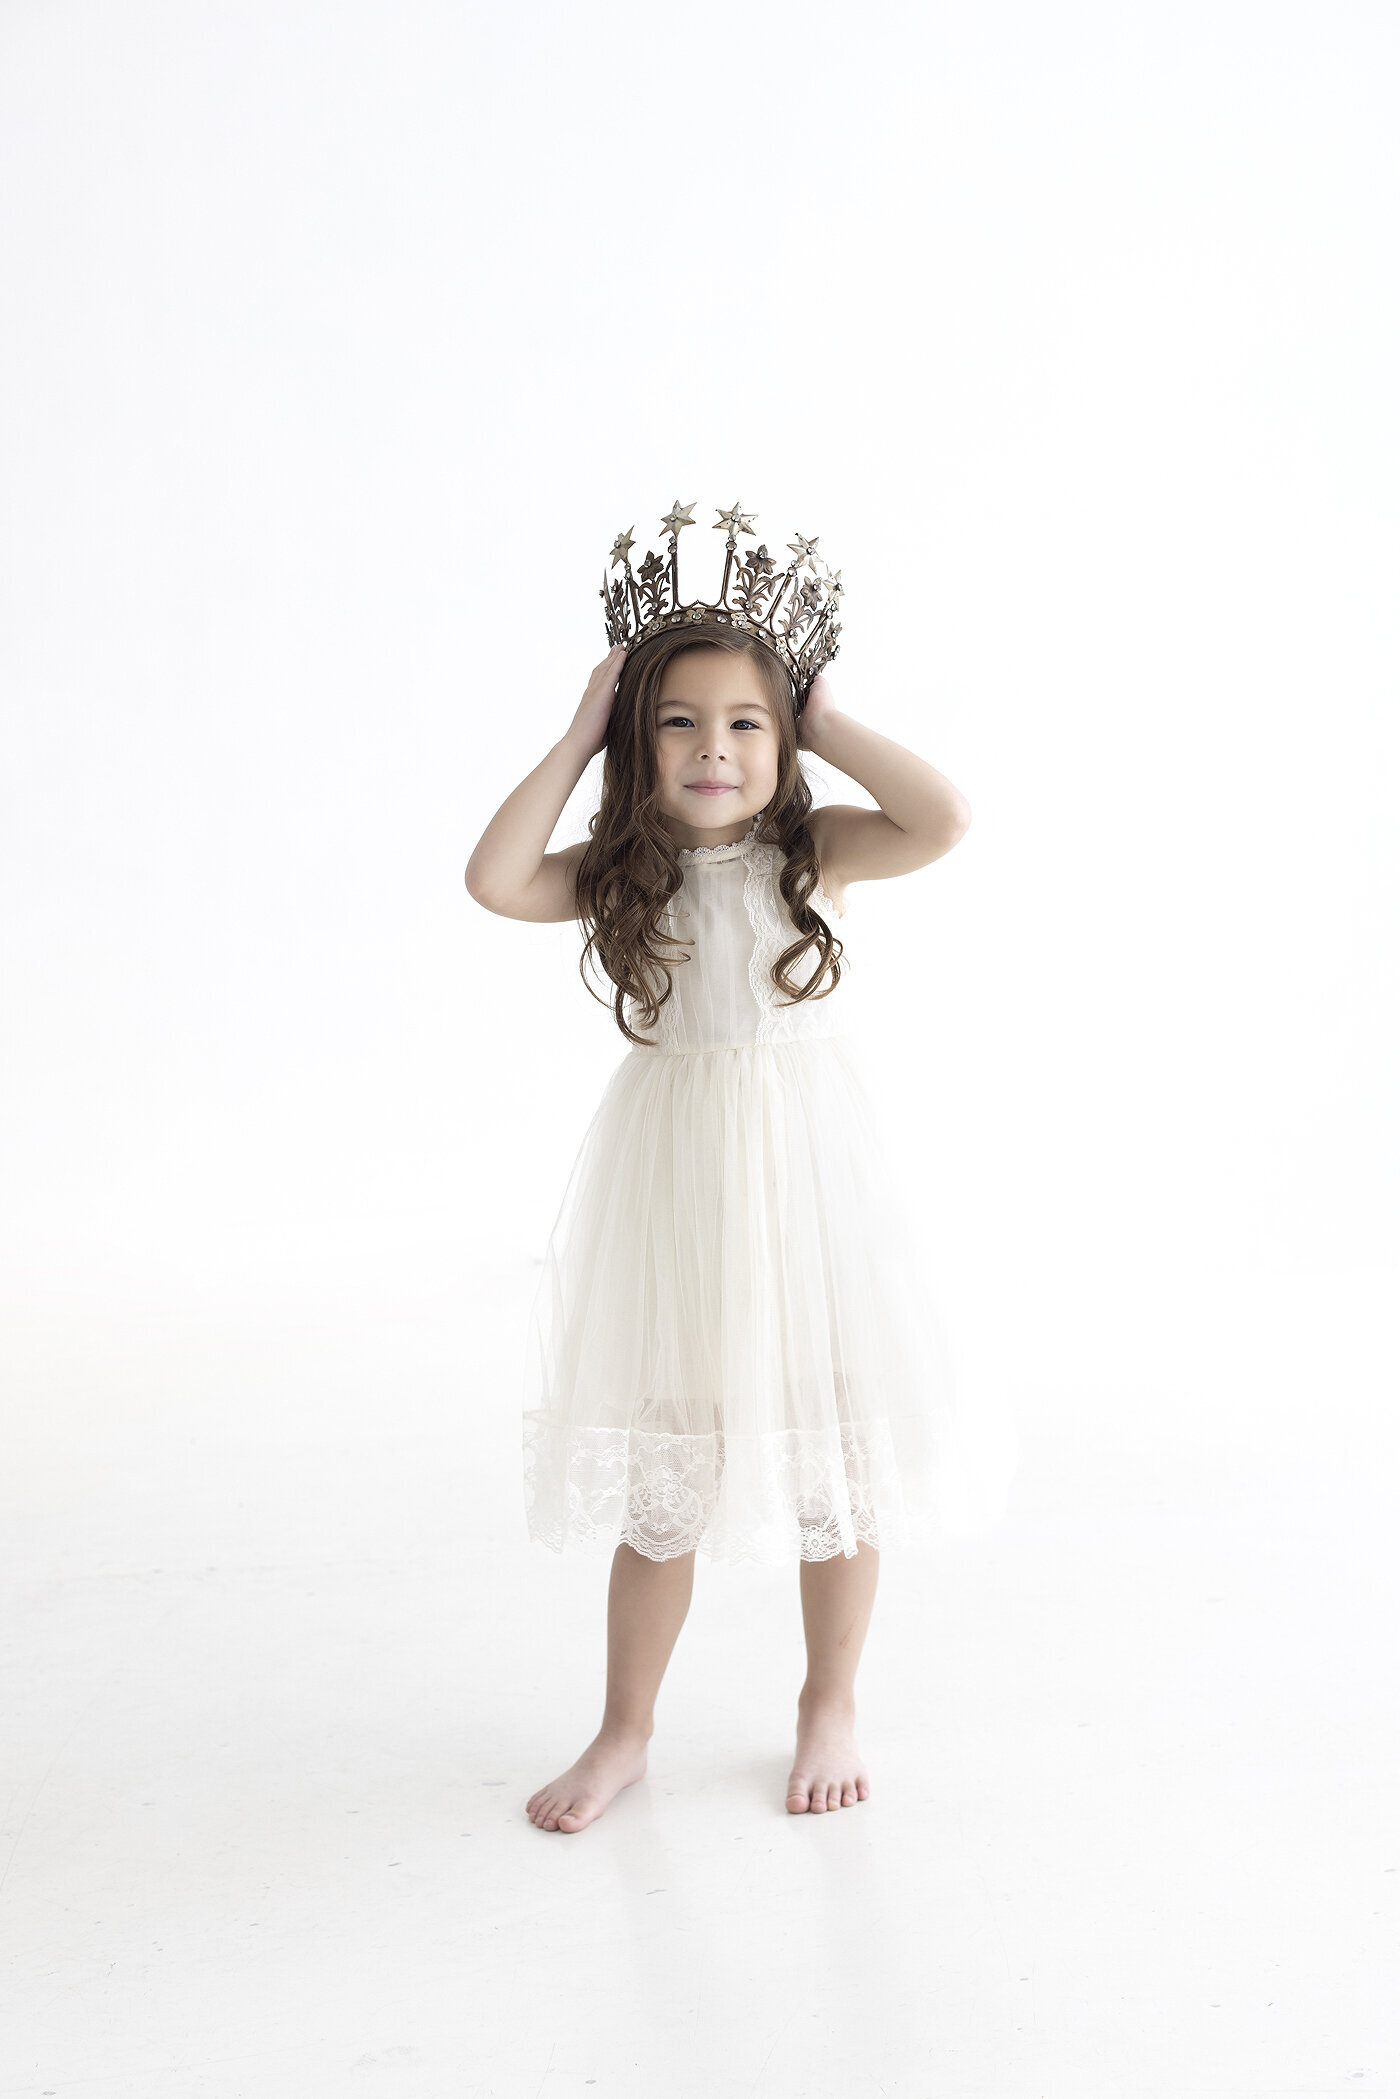 Photo of a young girl holding a crown on her head.